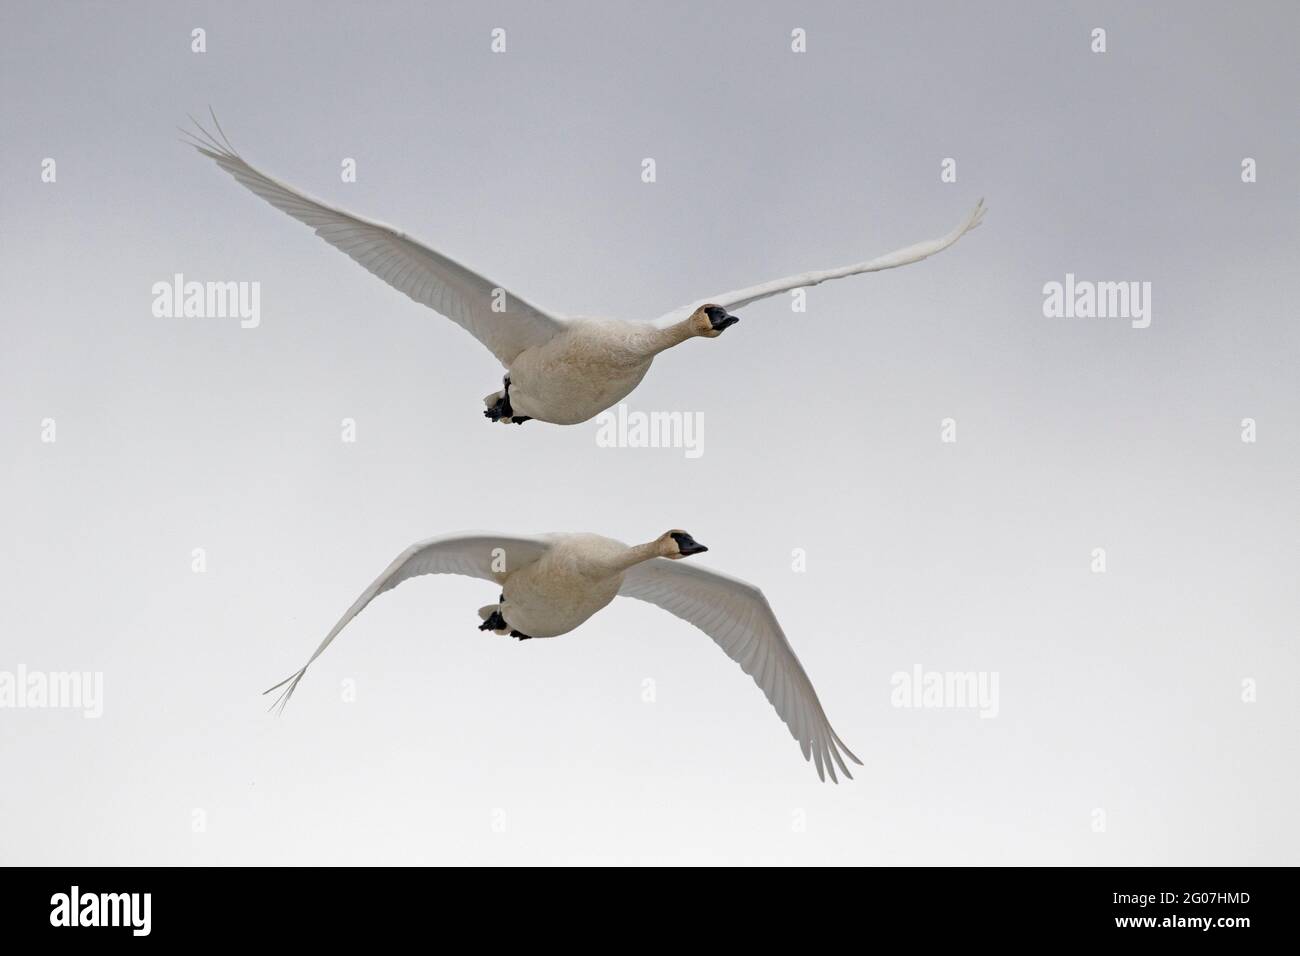 Trumpeter swans in flight create a mirror image against a neutral background. Stock Photo